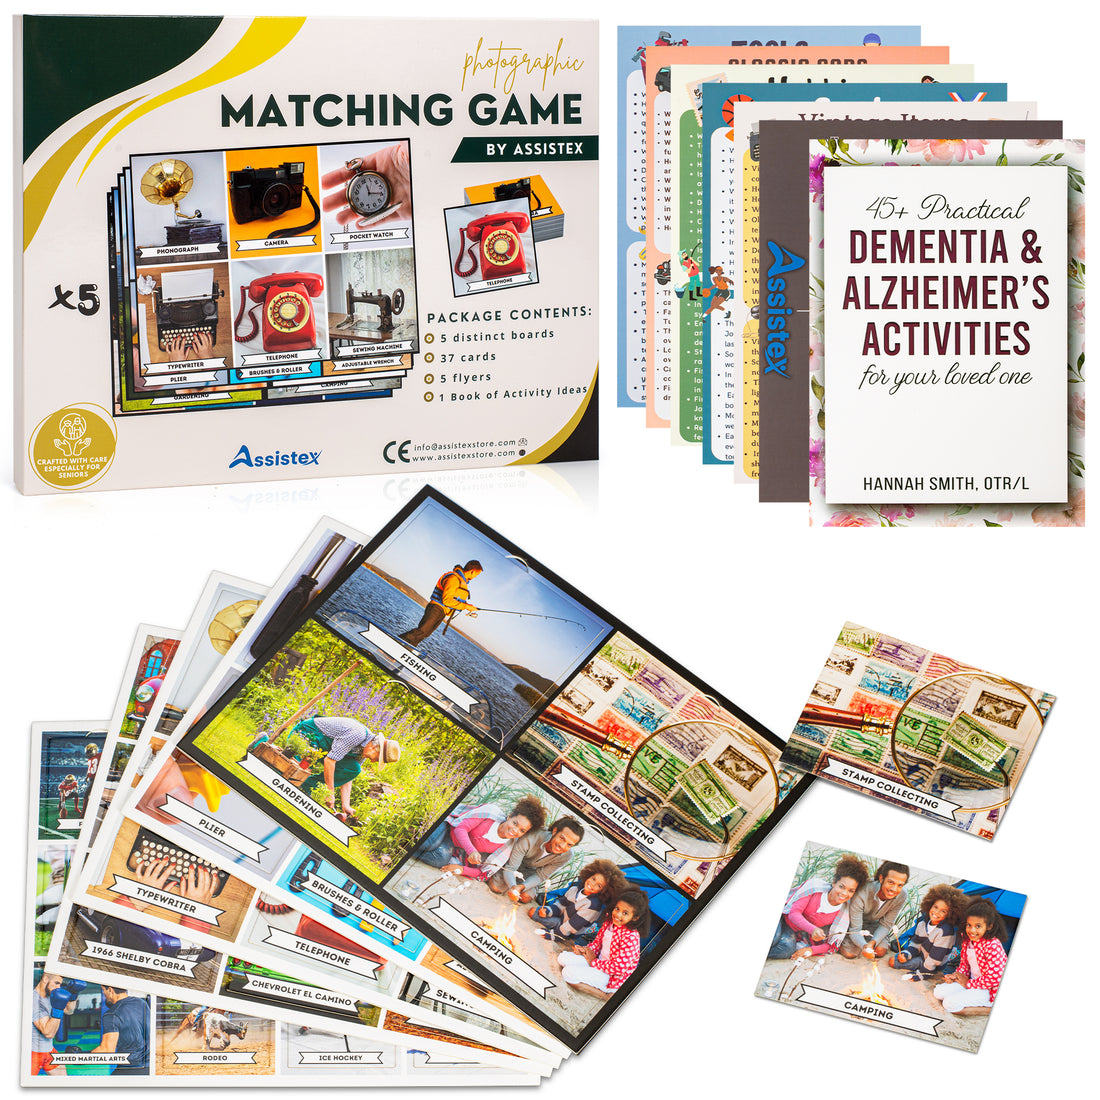 Assistex Matching Game Activity Board FOR MEN-  Dementia Activities for Seniors - Memory Games for Adults with Alzheimers - Memory Loss - Matching Card Memory Games for Seniors